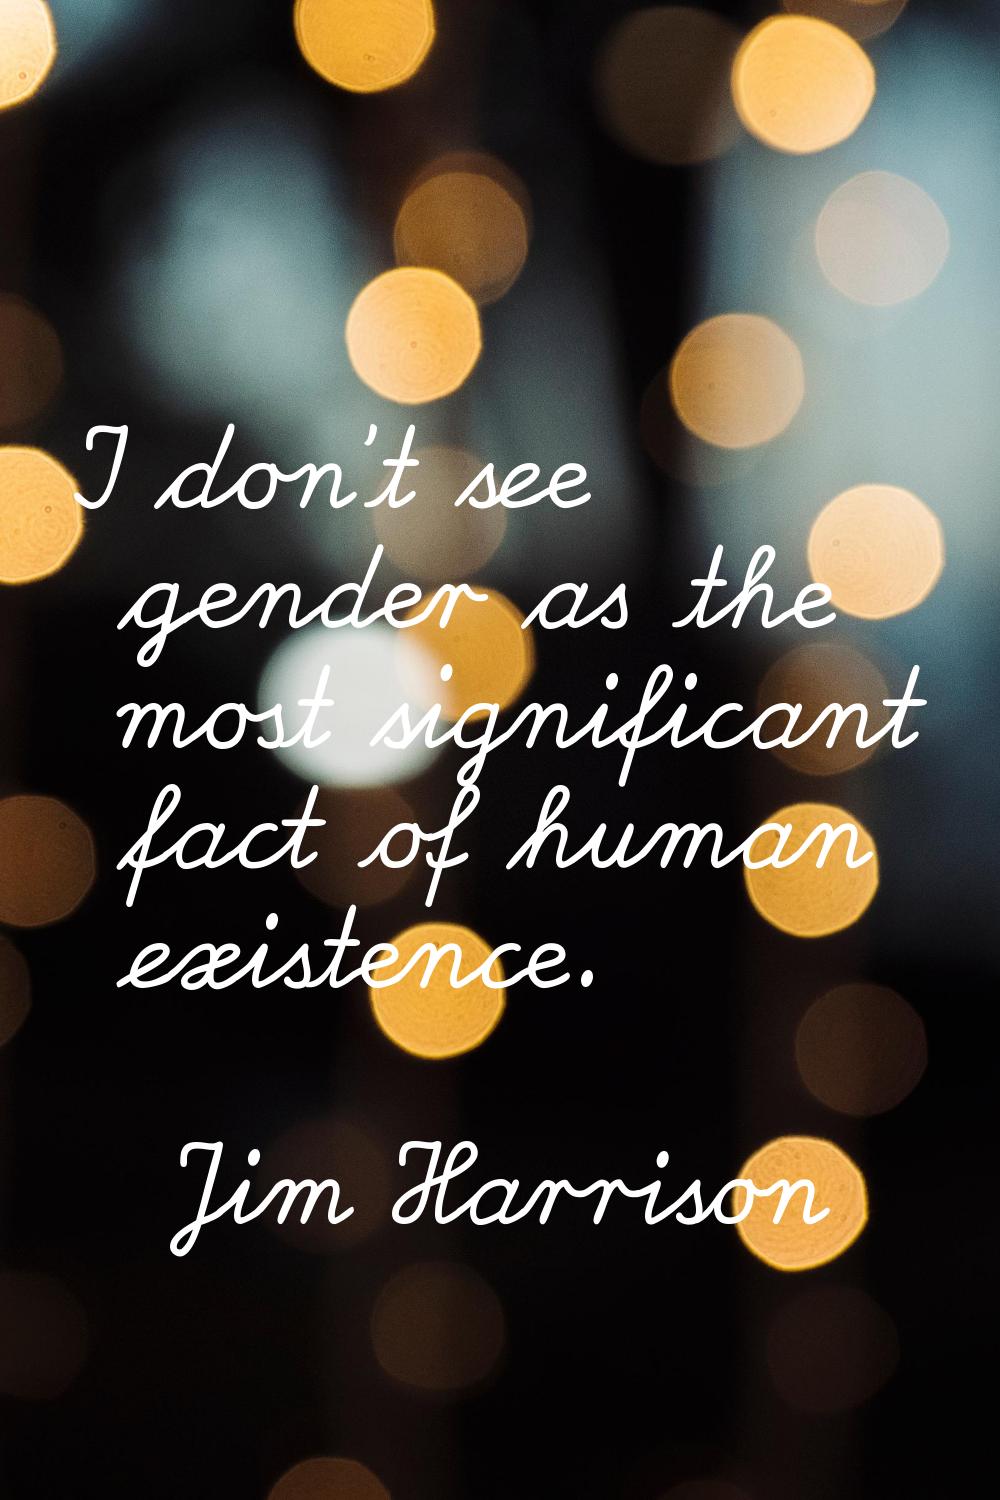 I don't see gender as the most significant fact of human existence.